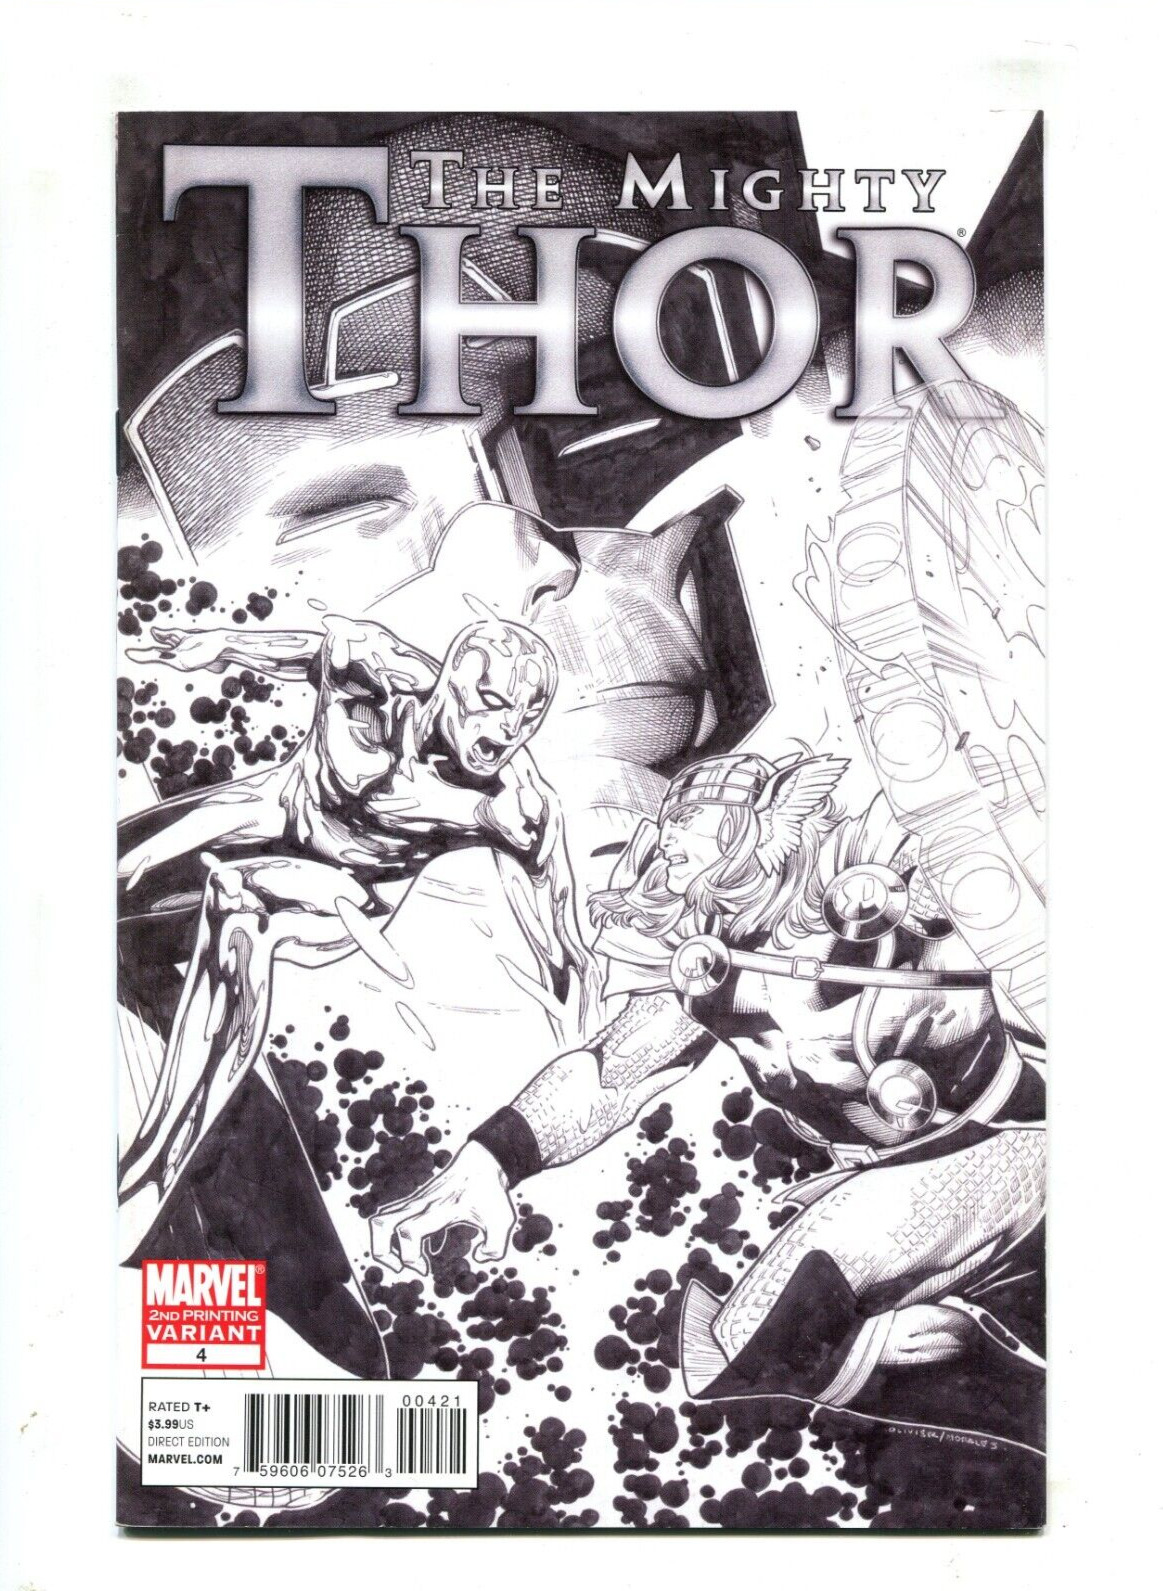 Mighty Thor #4 - Olivier Coipel & Mark Morales 2nd Print Variant (8.5/9.0) 2011